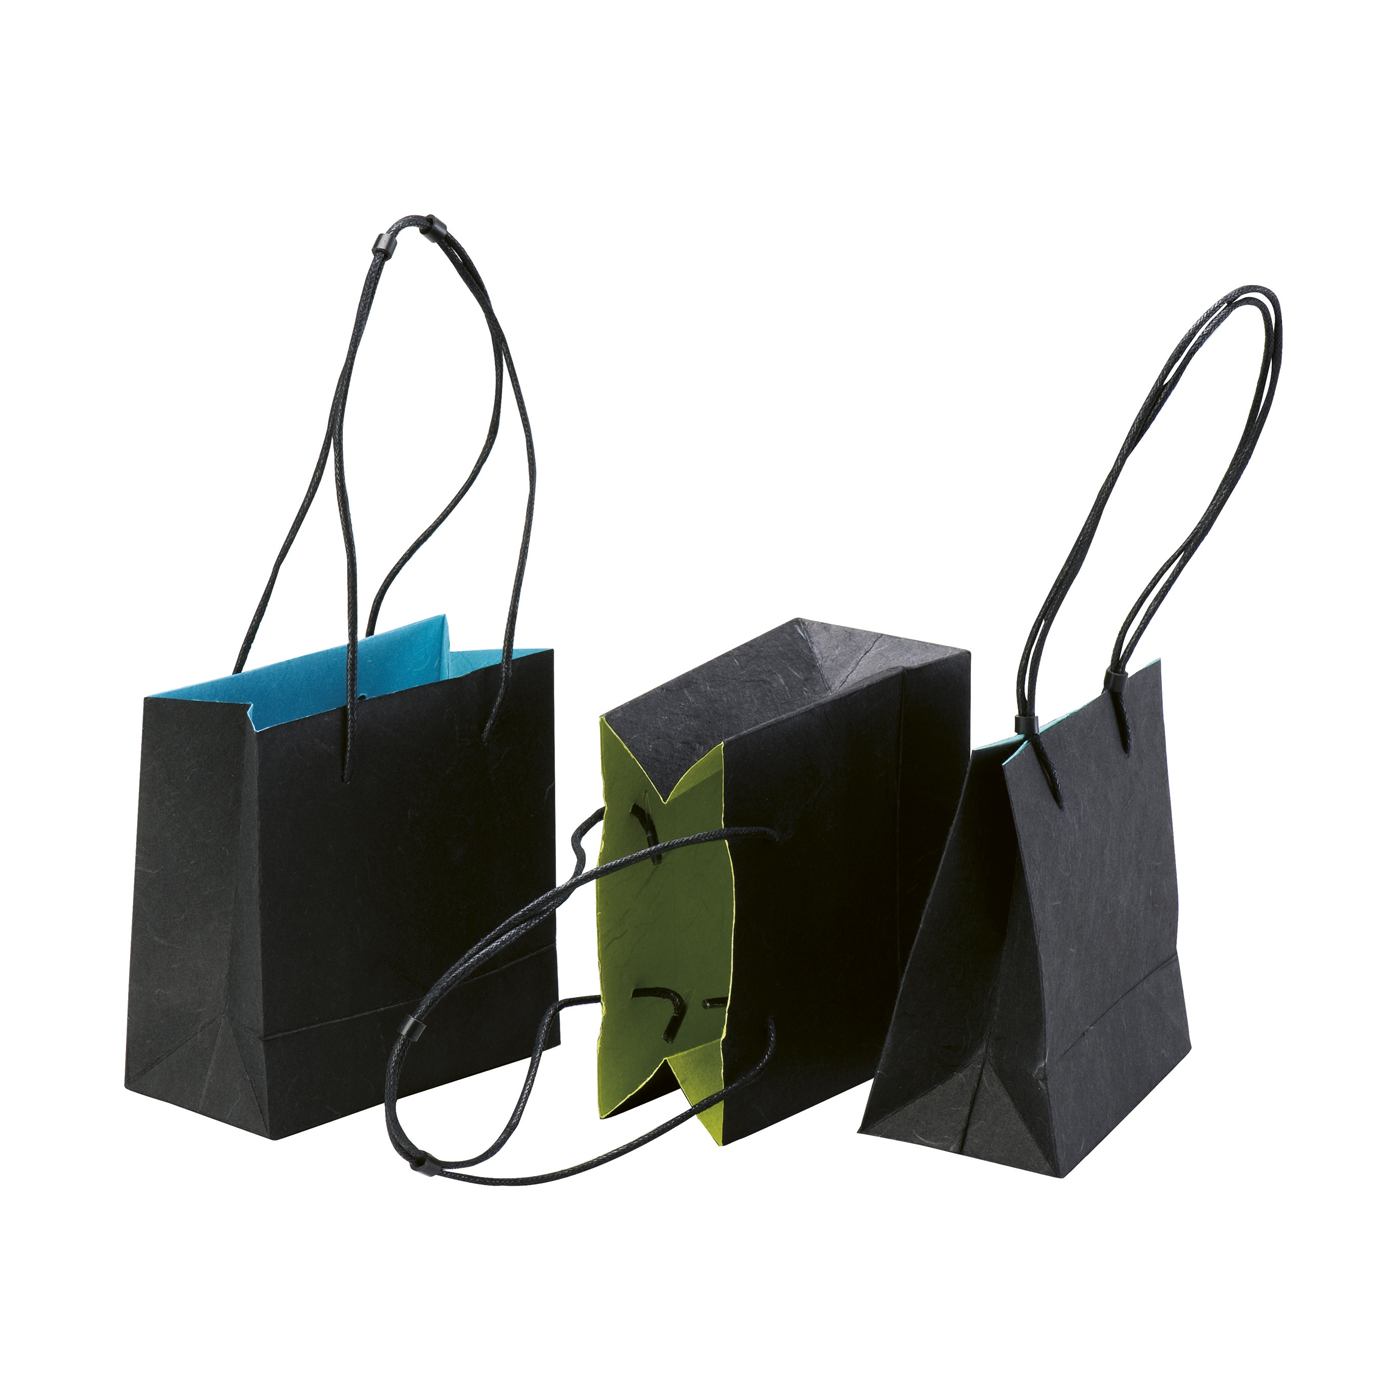 Carrying Bags "Duo", Green/Turquoise/Blue, 120 x 60 x 120 mm - 3 pieces